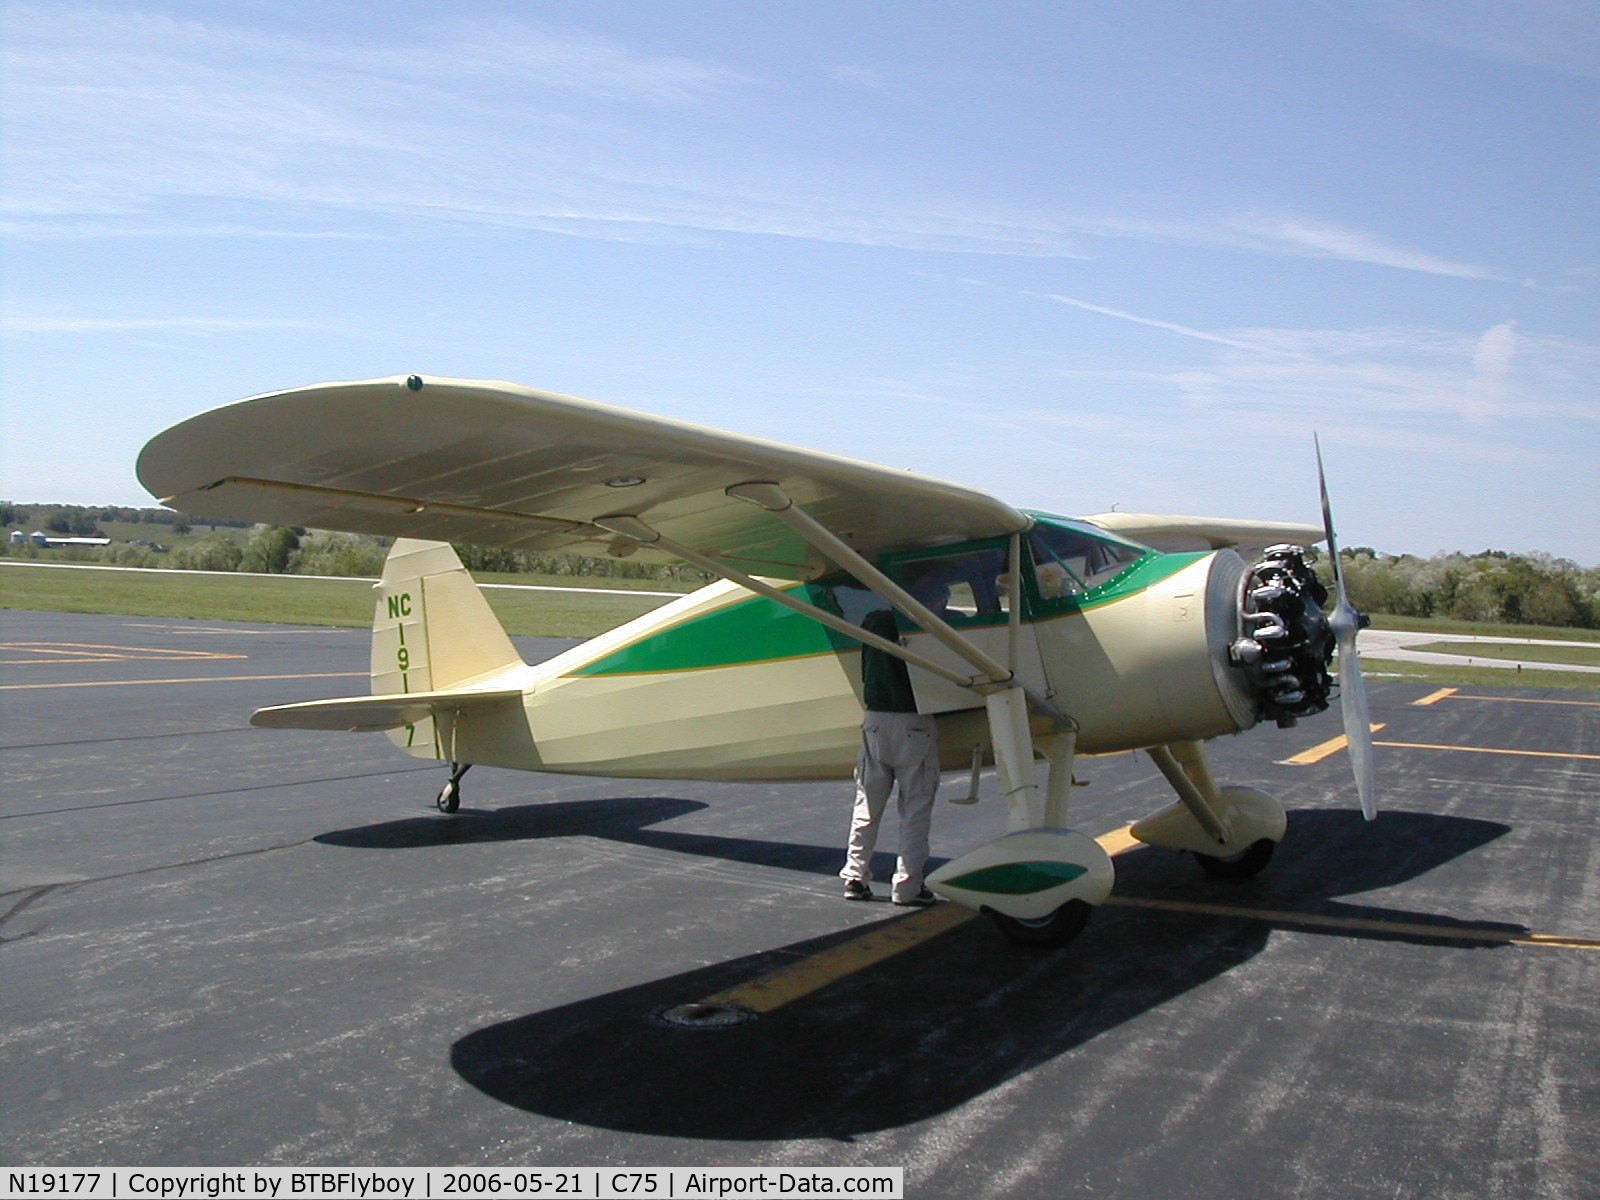 N19177, 1938 Fairchild 24 J C/N 3501, Fuel stop at Lacon, IL during delivery flight from Huntington, IN to Antique Airfield near Blakesburg, IA